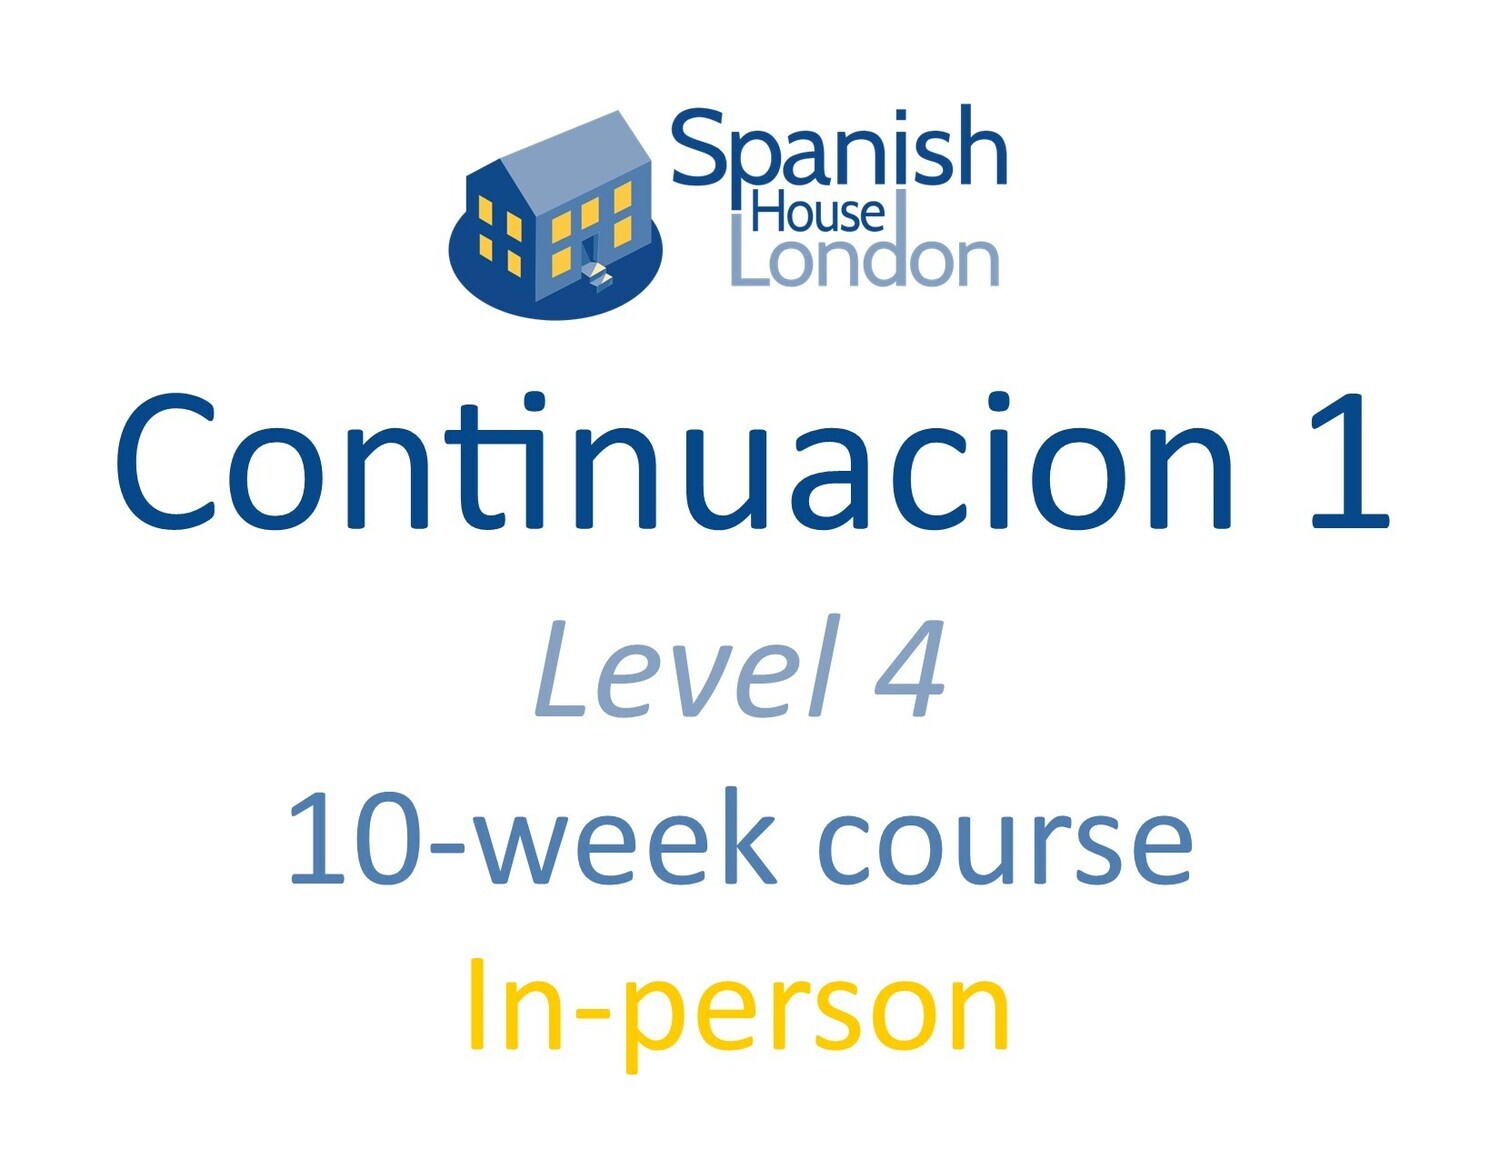 Continuacion 1 Course starting on 18th September at 6pm in Euston / King's Cross